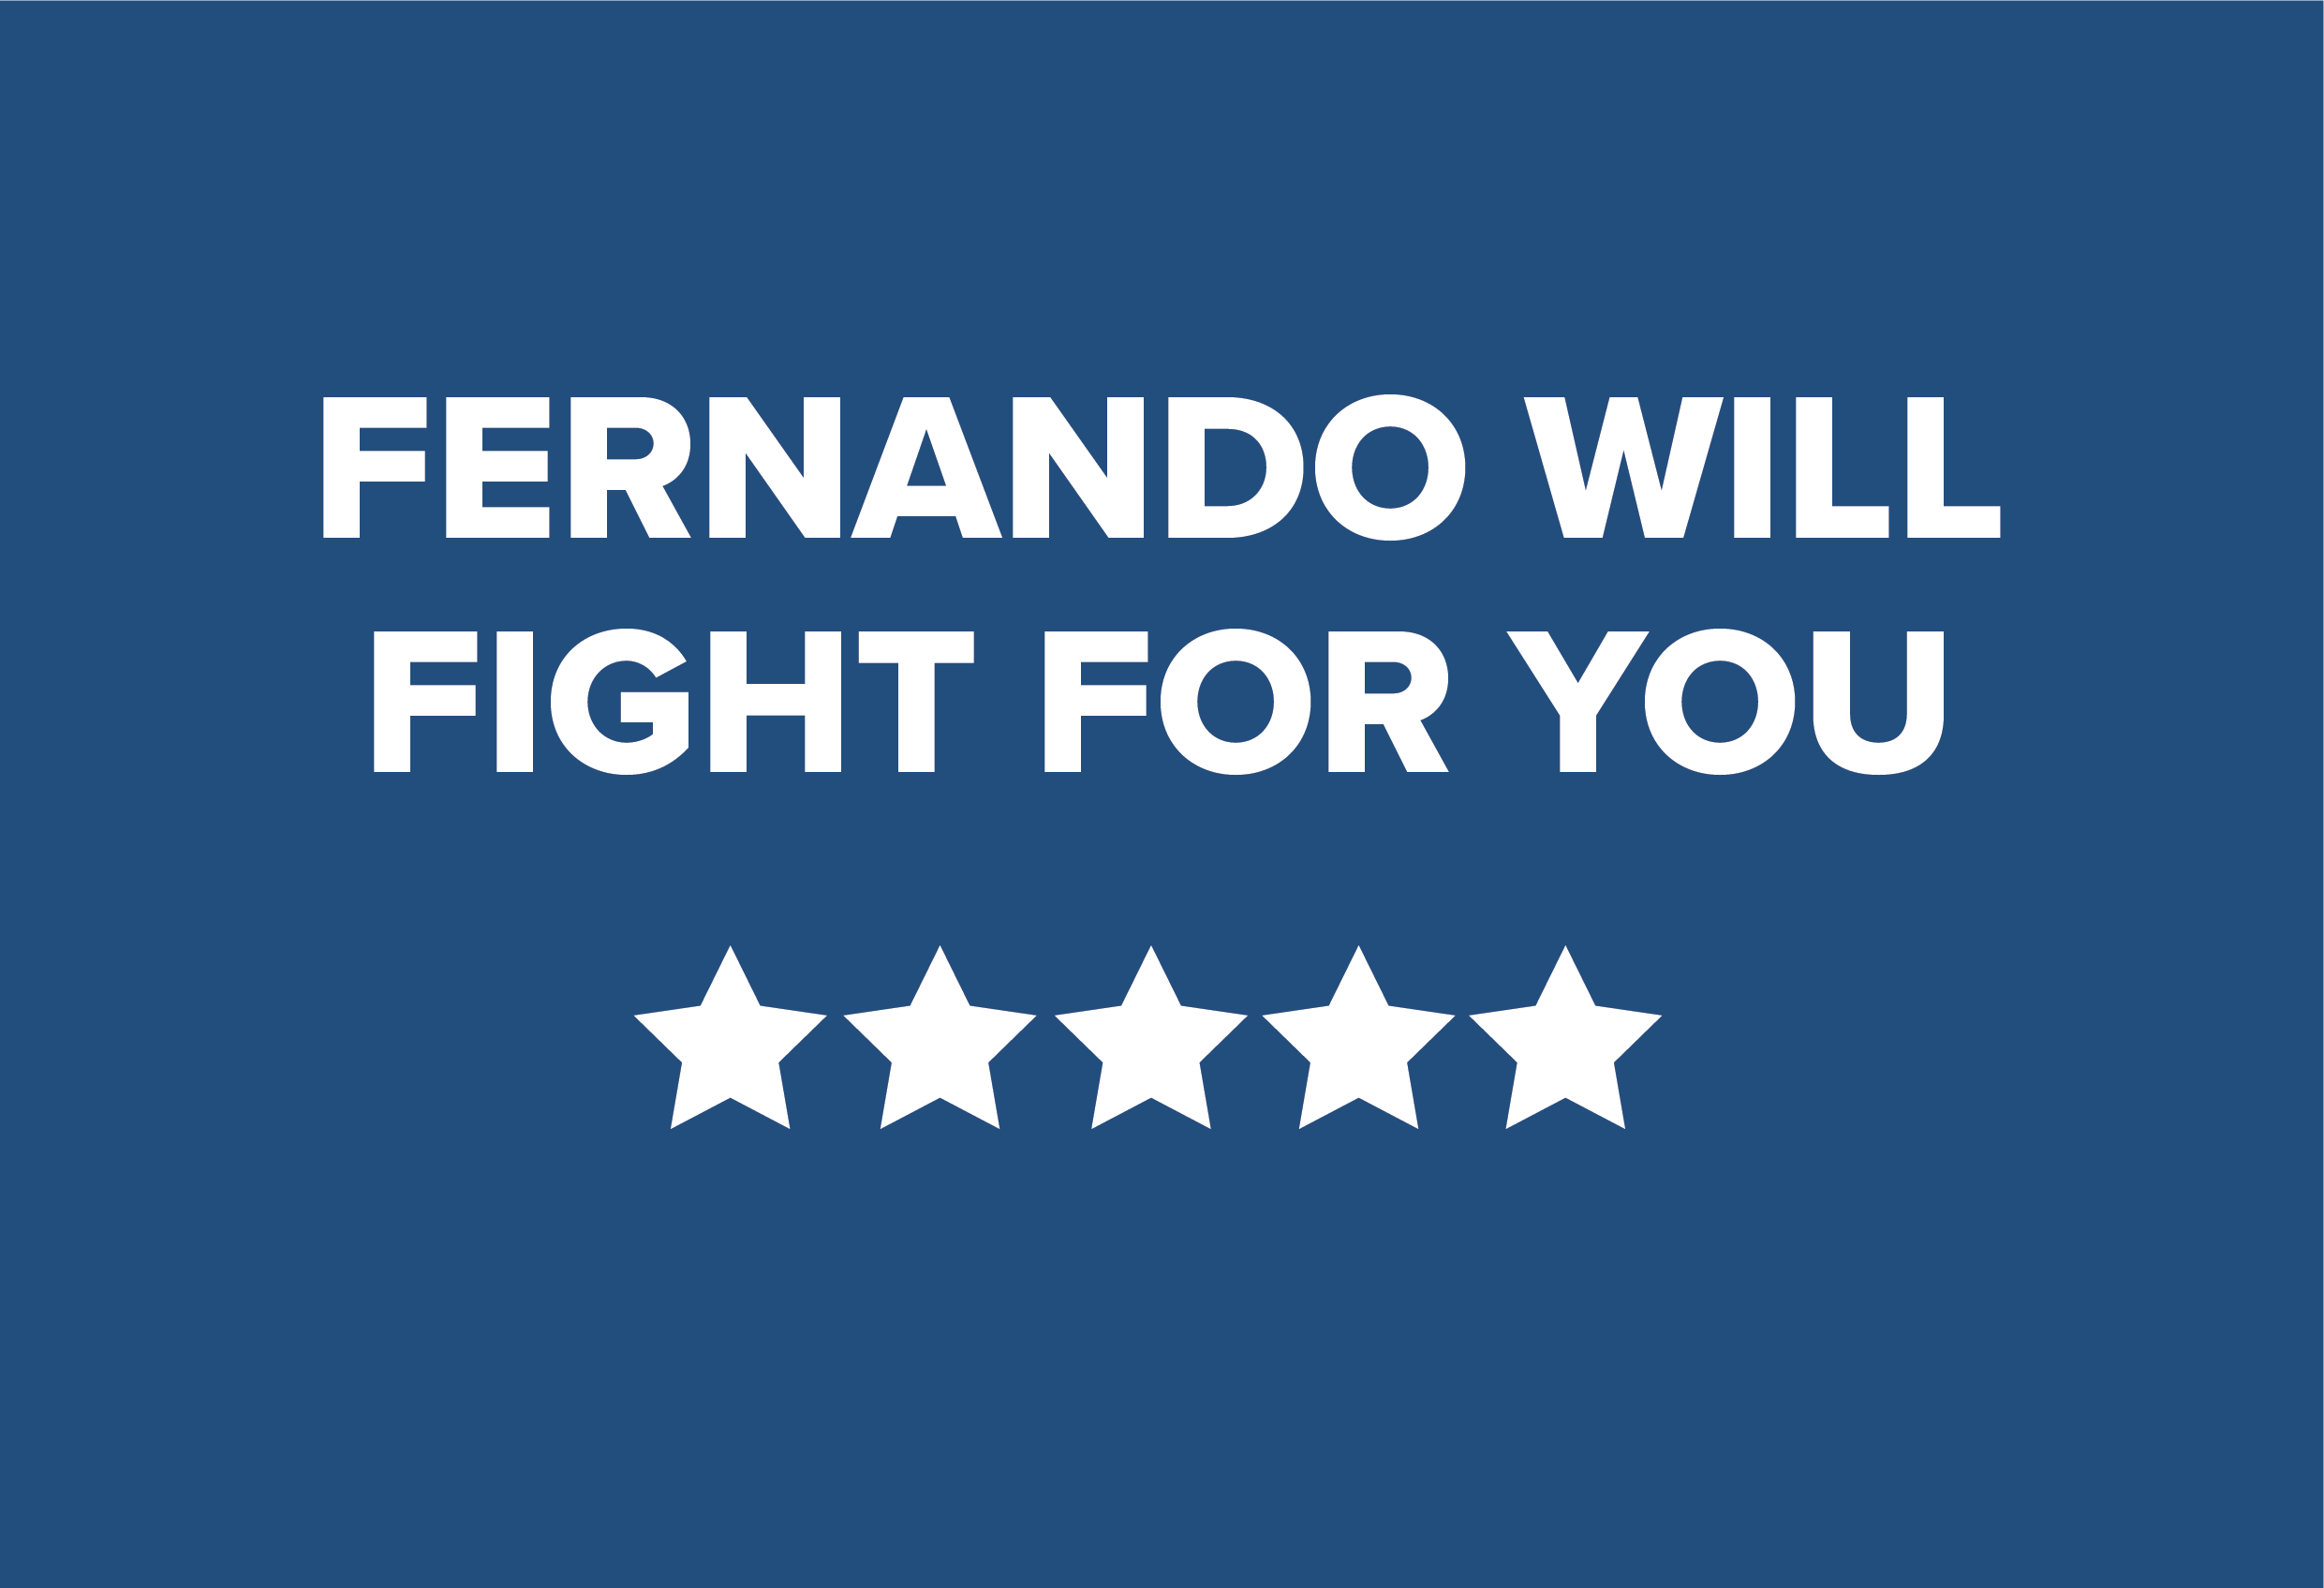 Fernando will fight for you